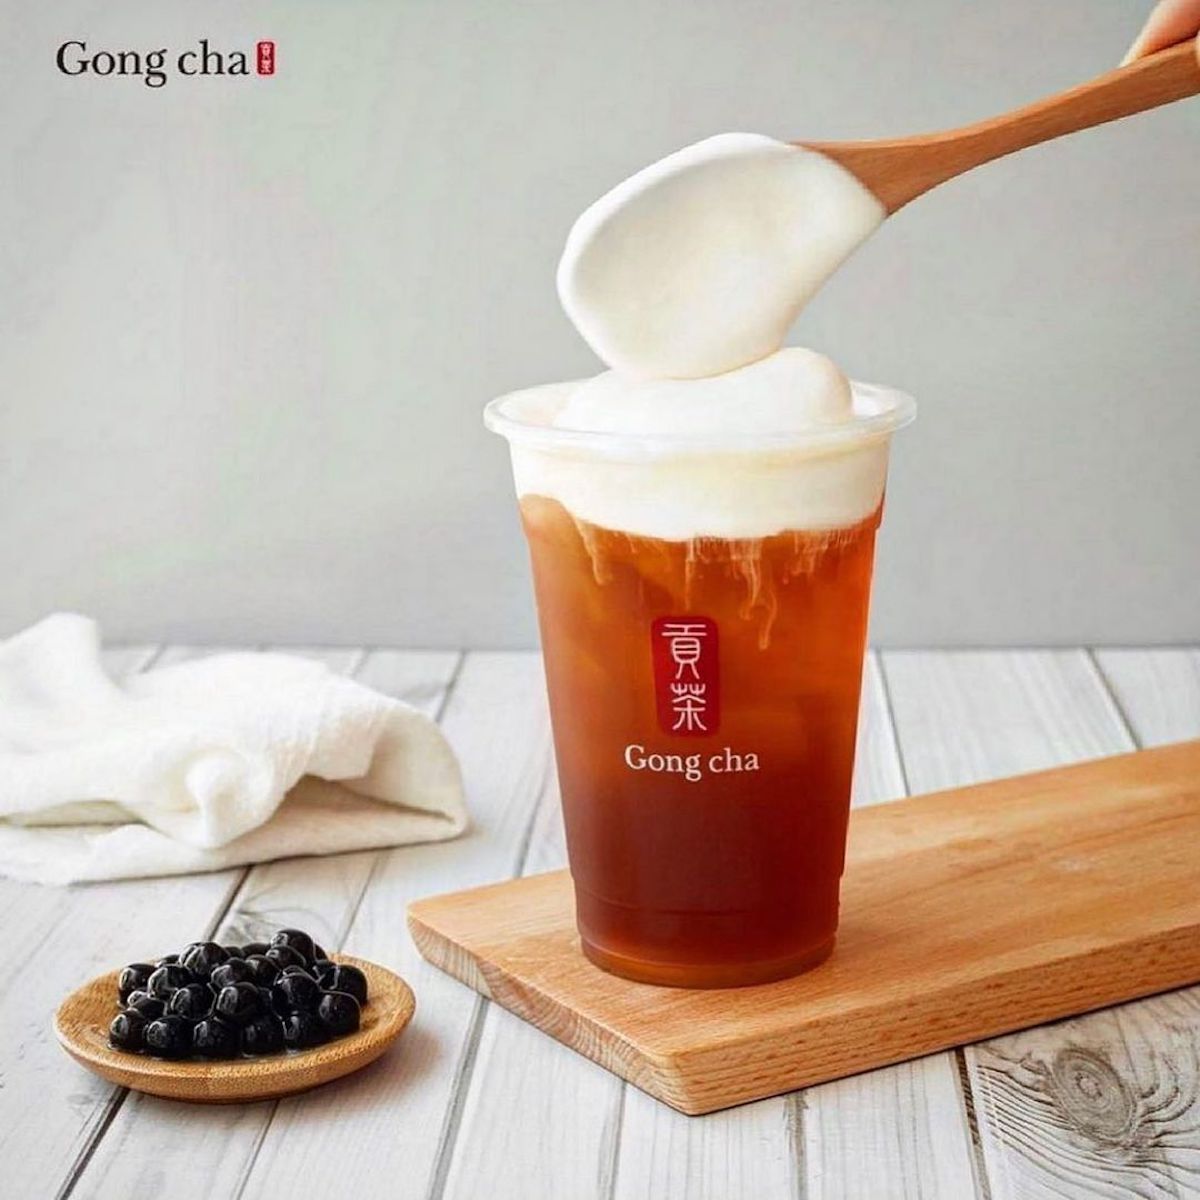 Chicago-Area To See First U.S. Corporate Gong Cha Plus More from What Now Media Group's Weekly Pre-Opening Restaurant News Report